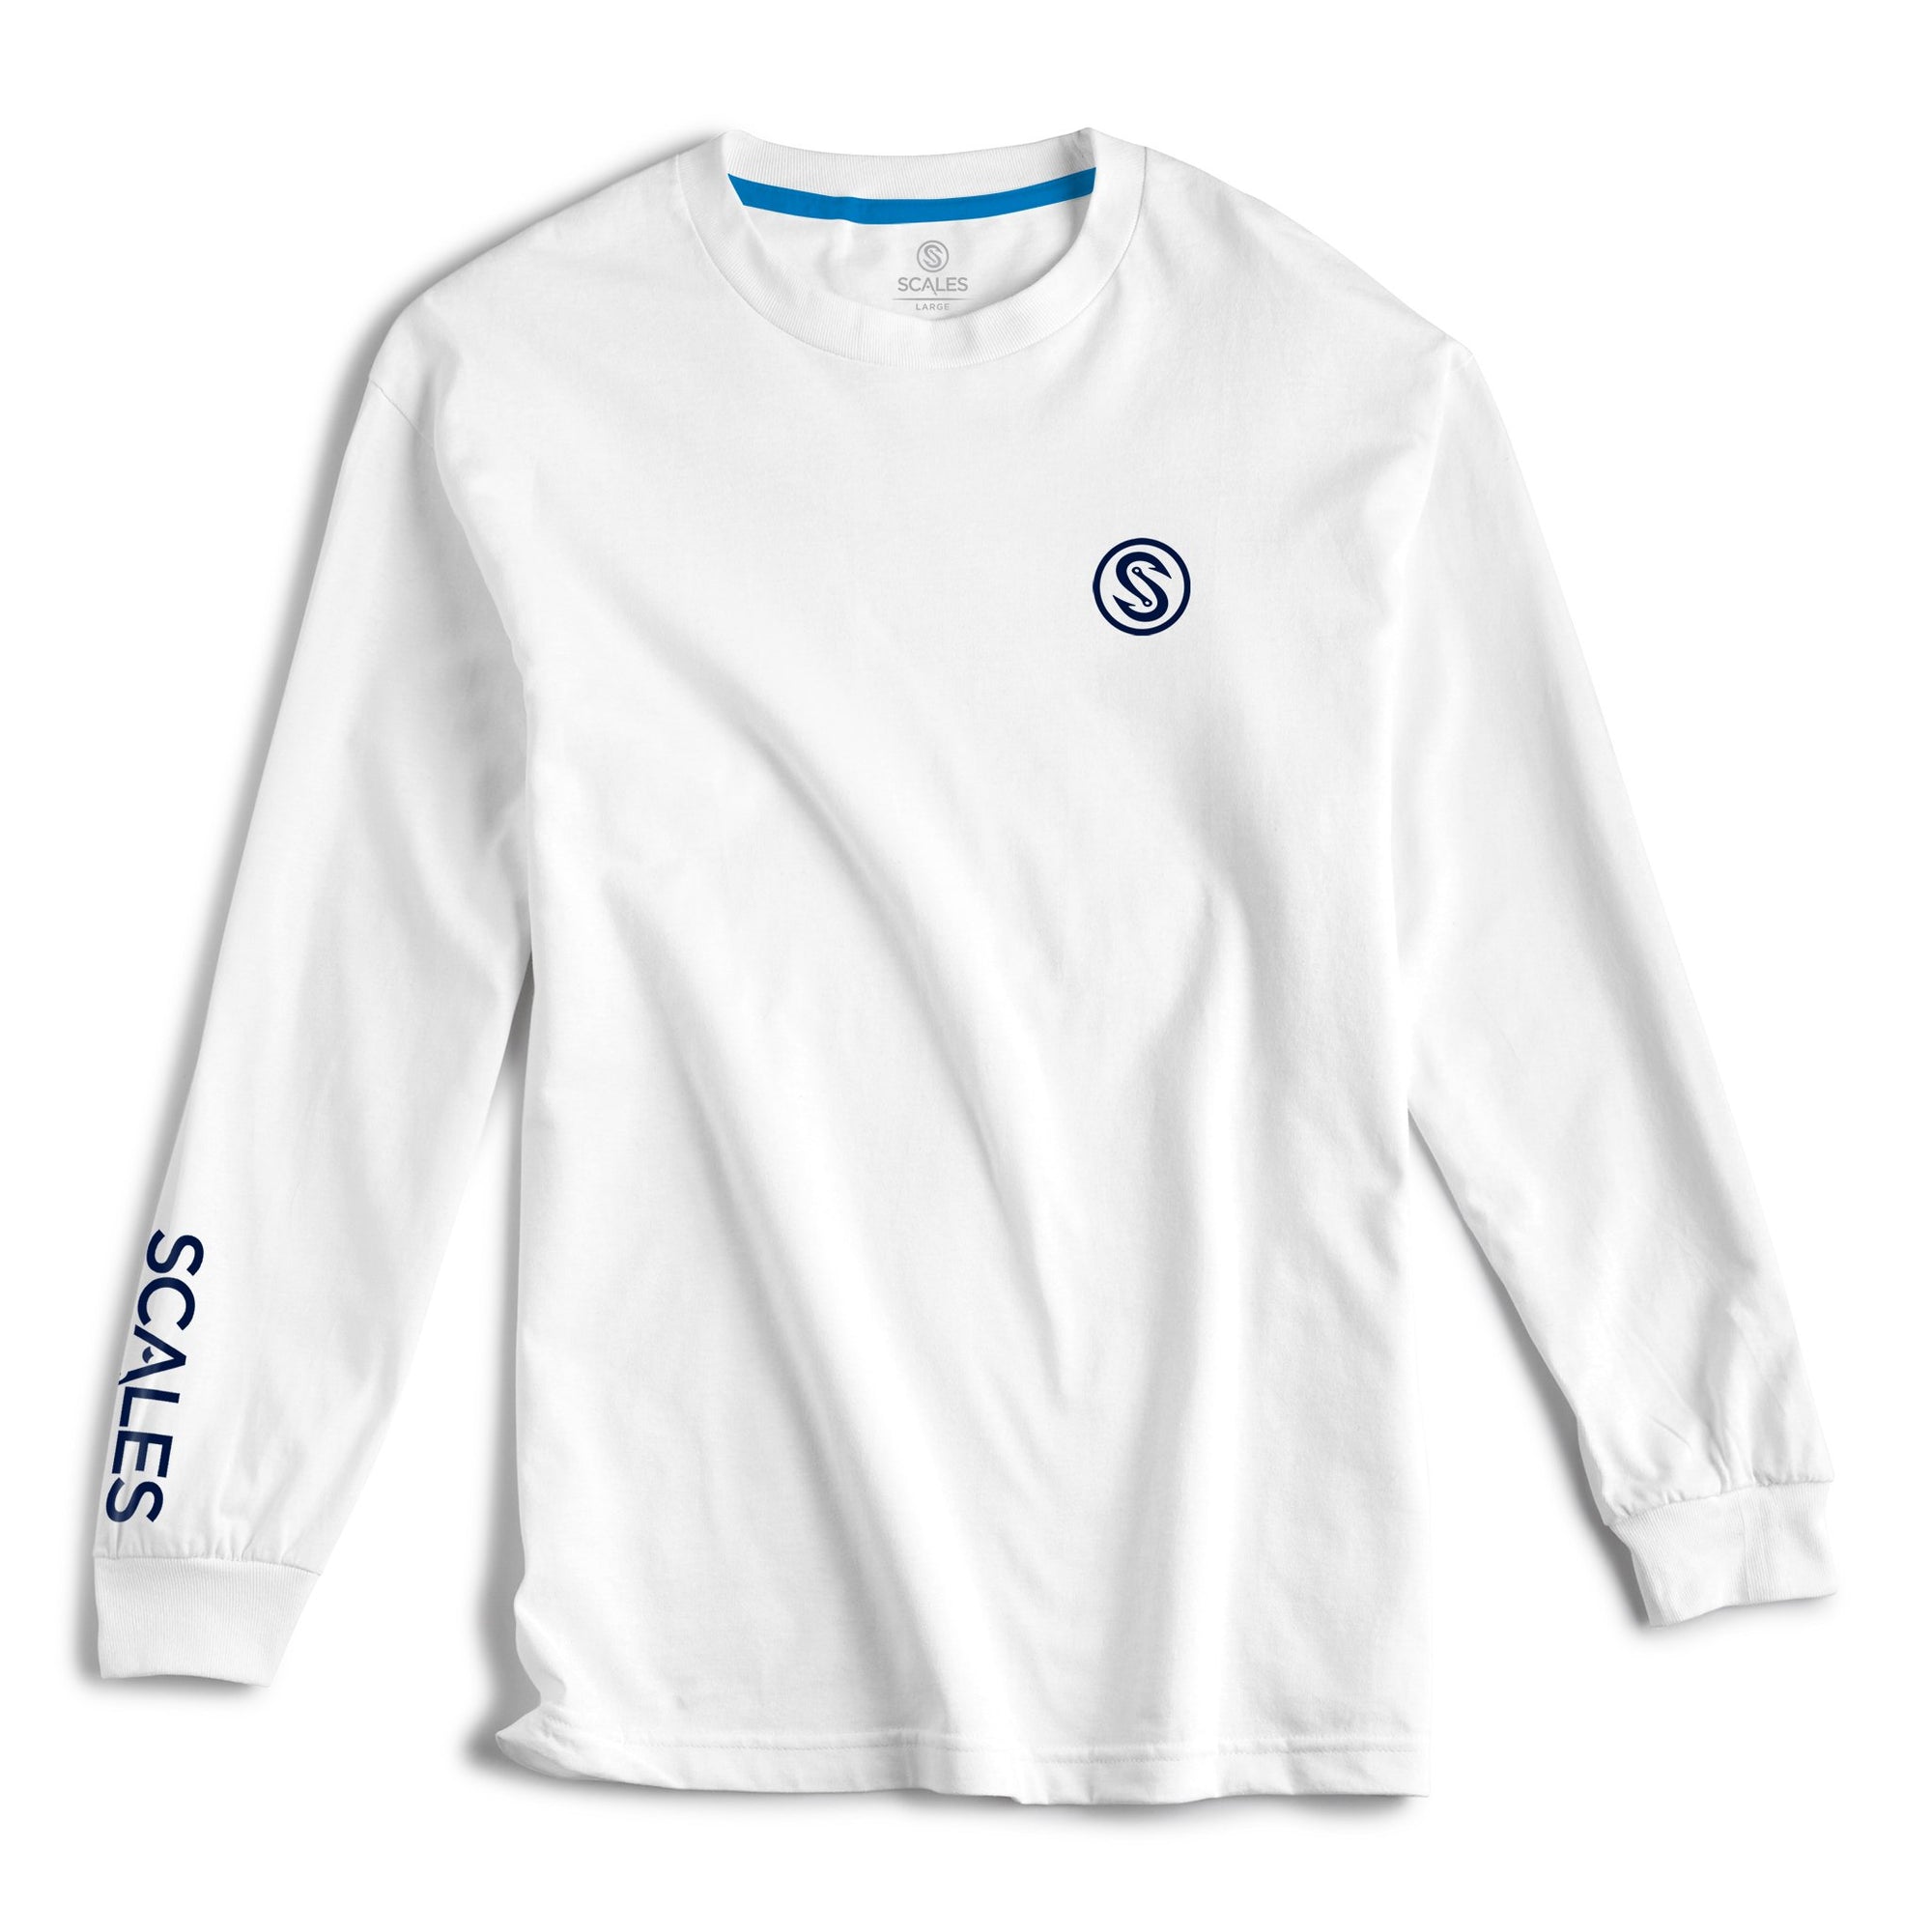 Scales Gear Scales Built Long Sleeve White Shirt - Front View